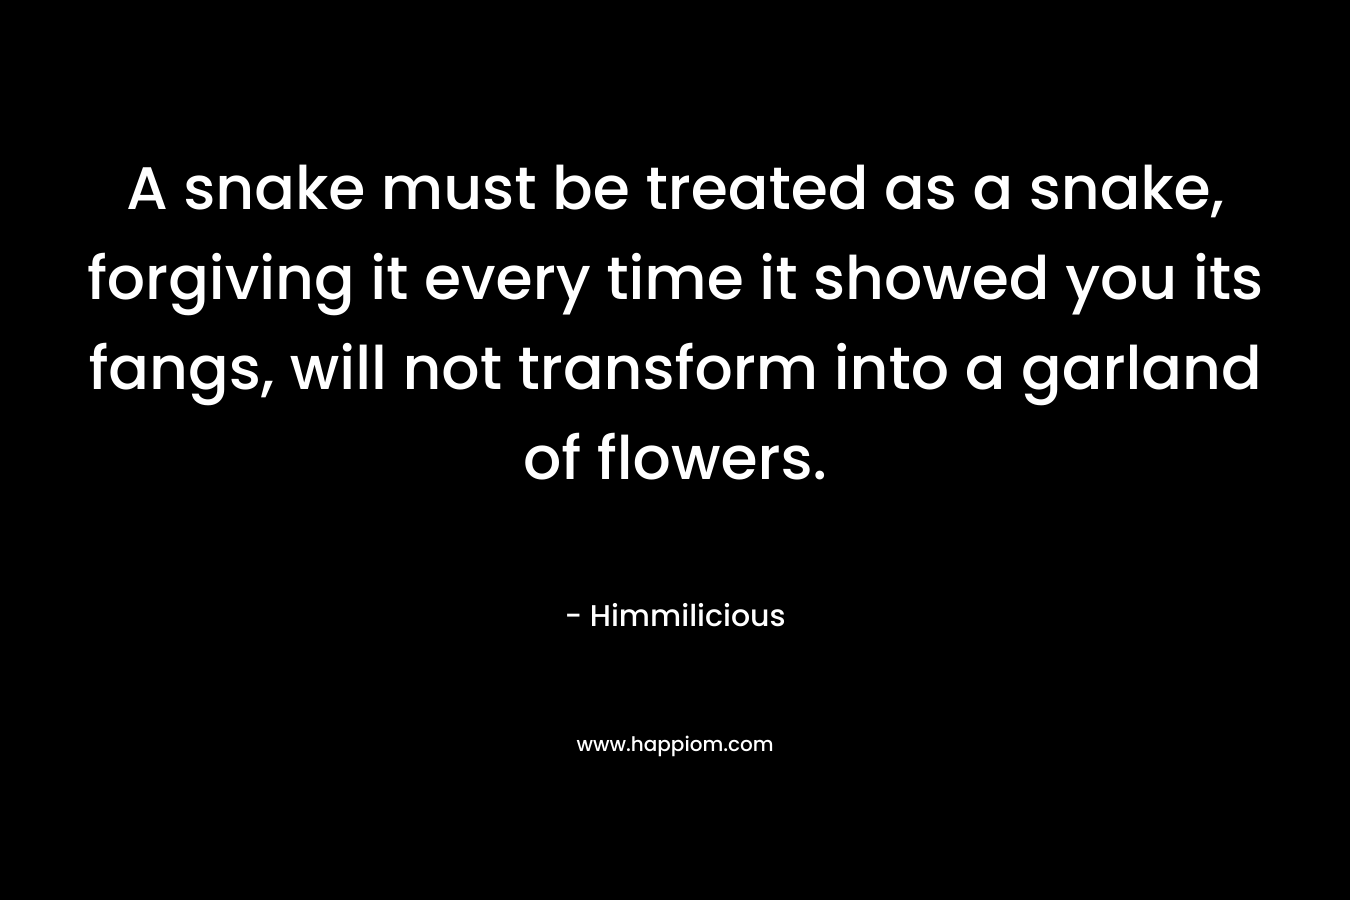 A snake must be treated as a snake, forgiving it every time it showed you its fangs, will not transform into a garland of flowers. – Himmilicious